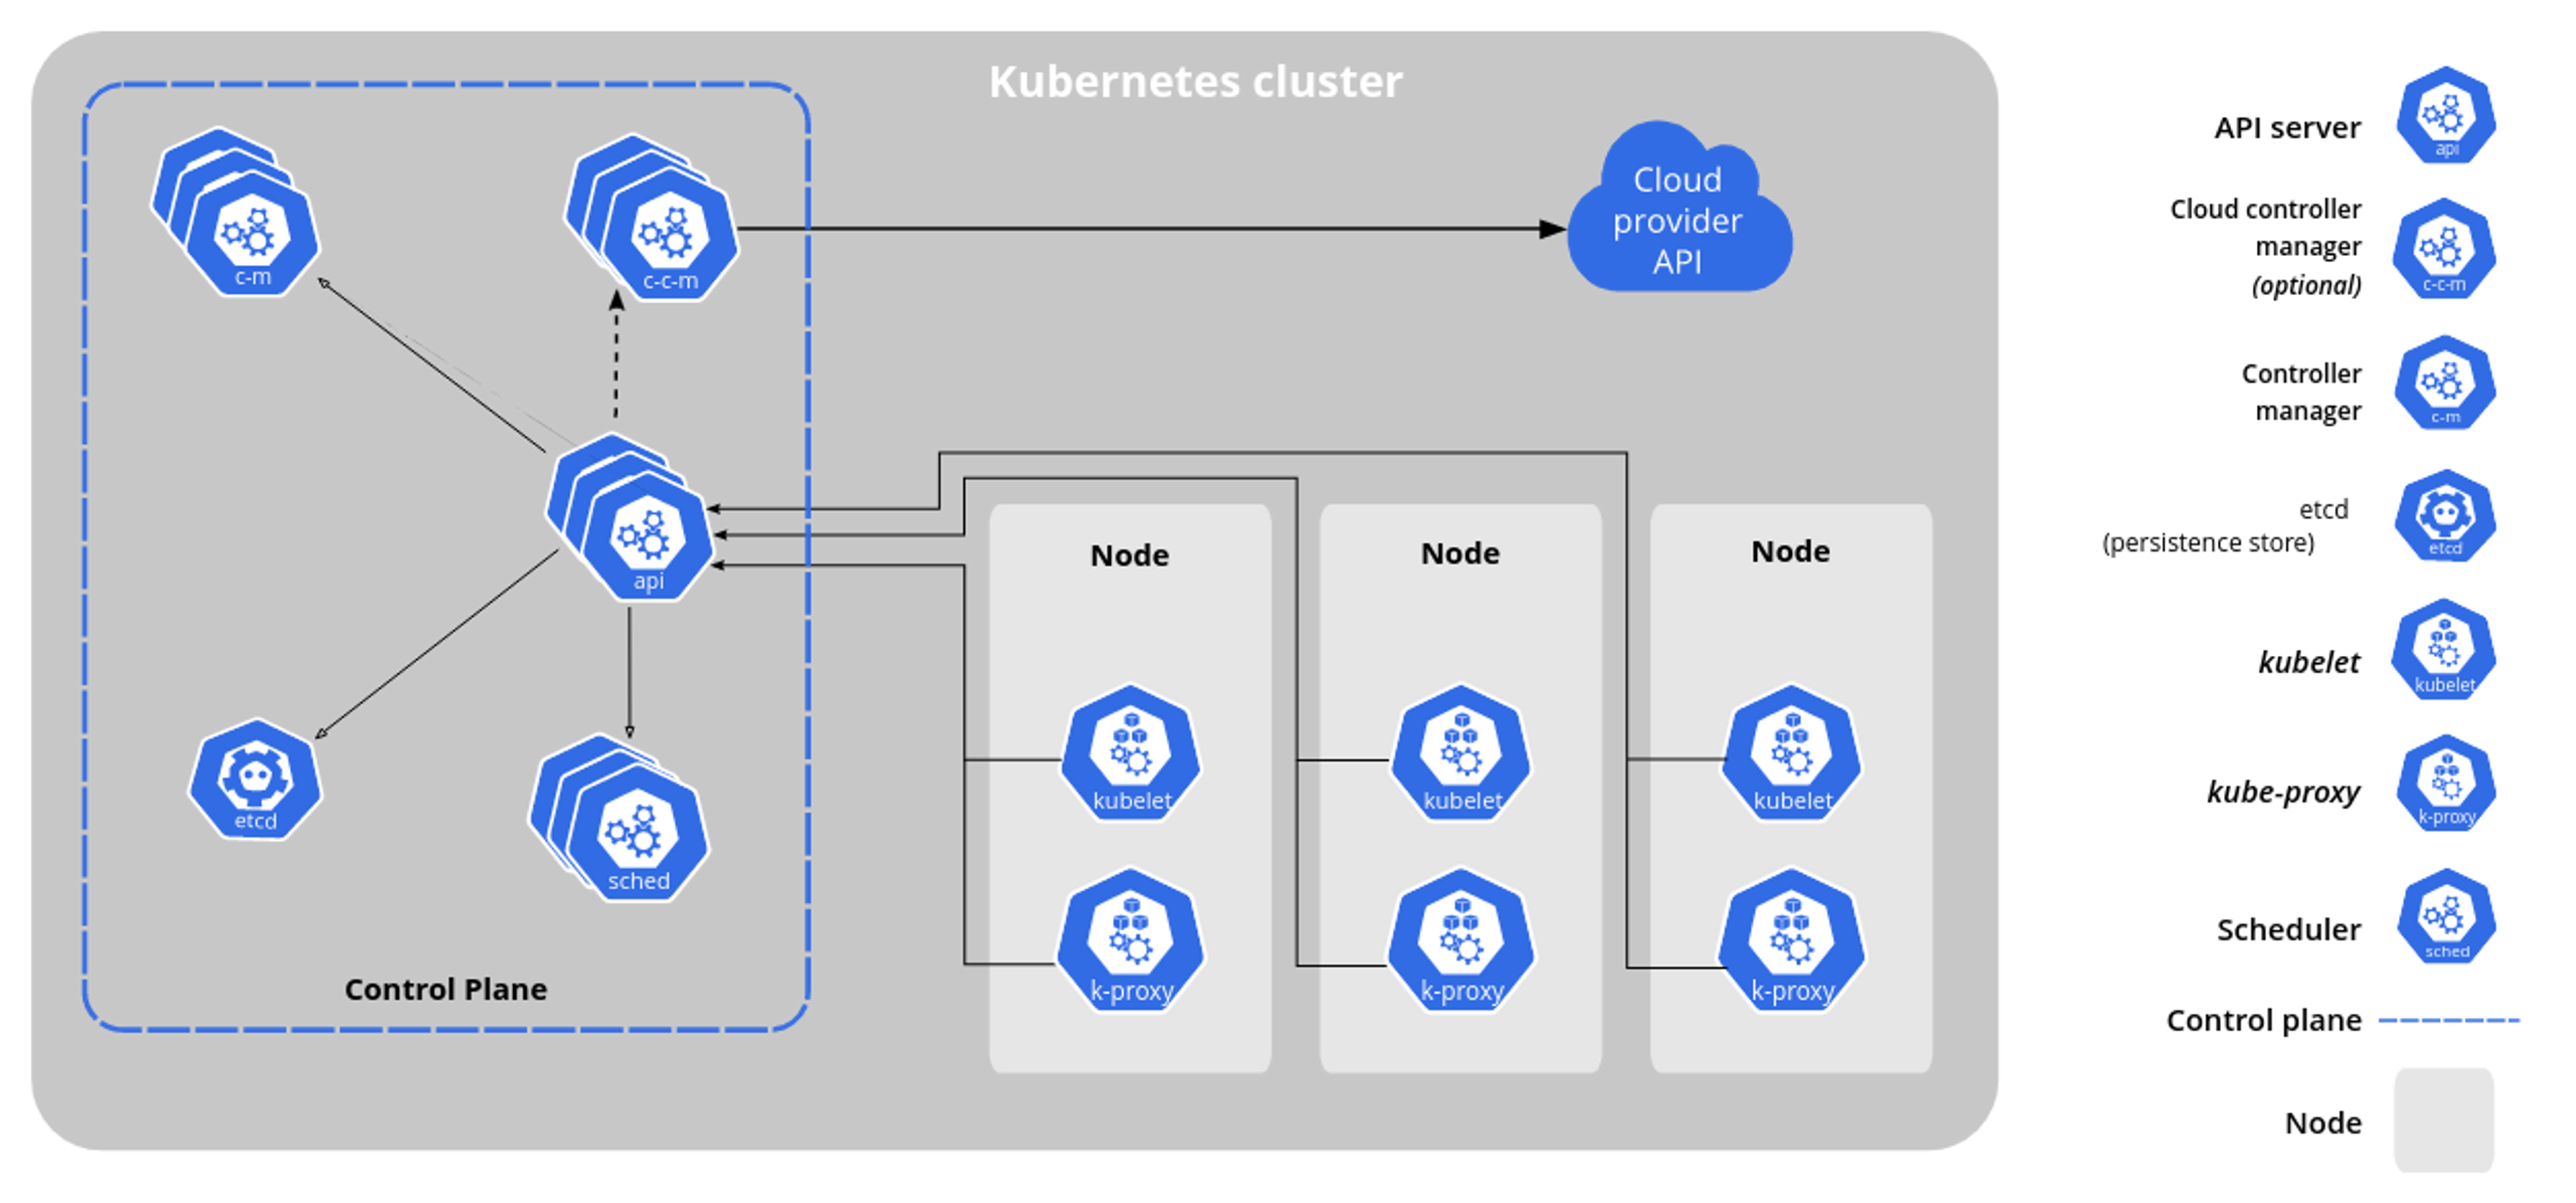 Components of Kubernetes